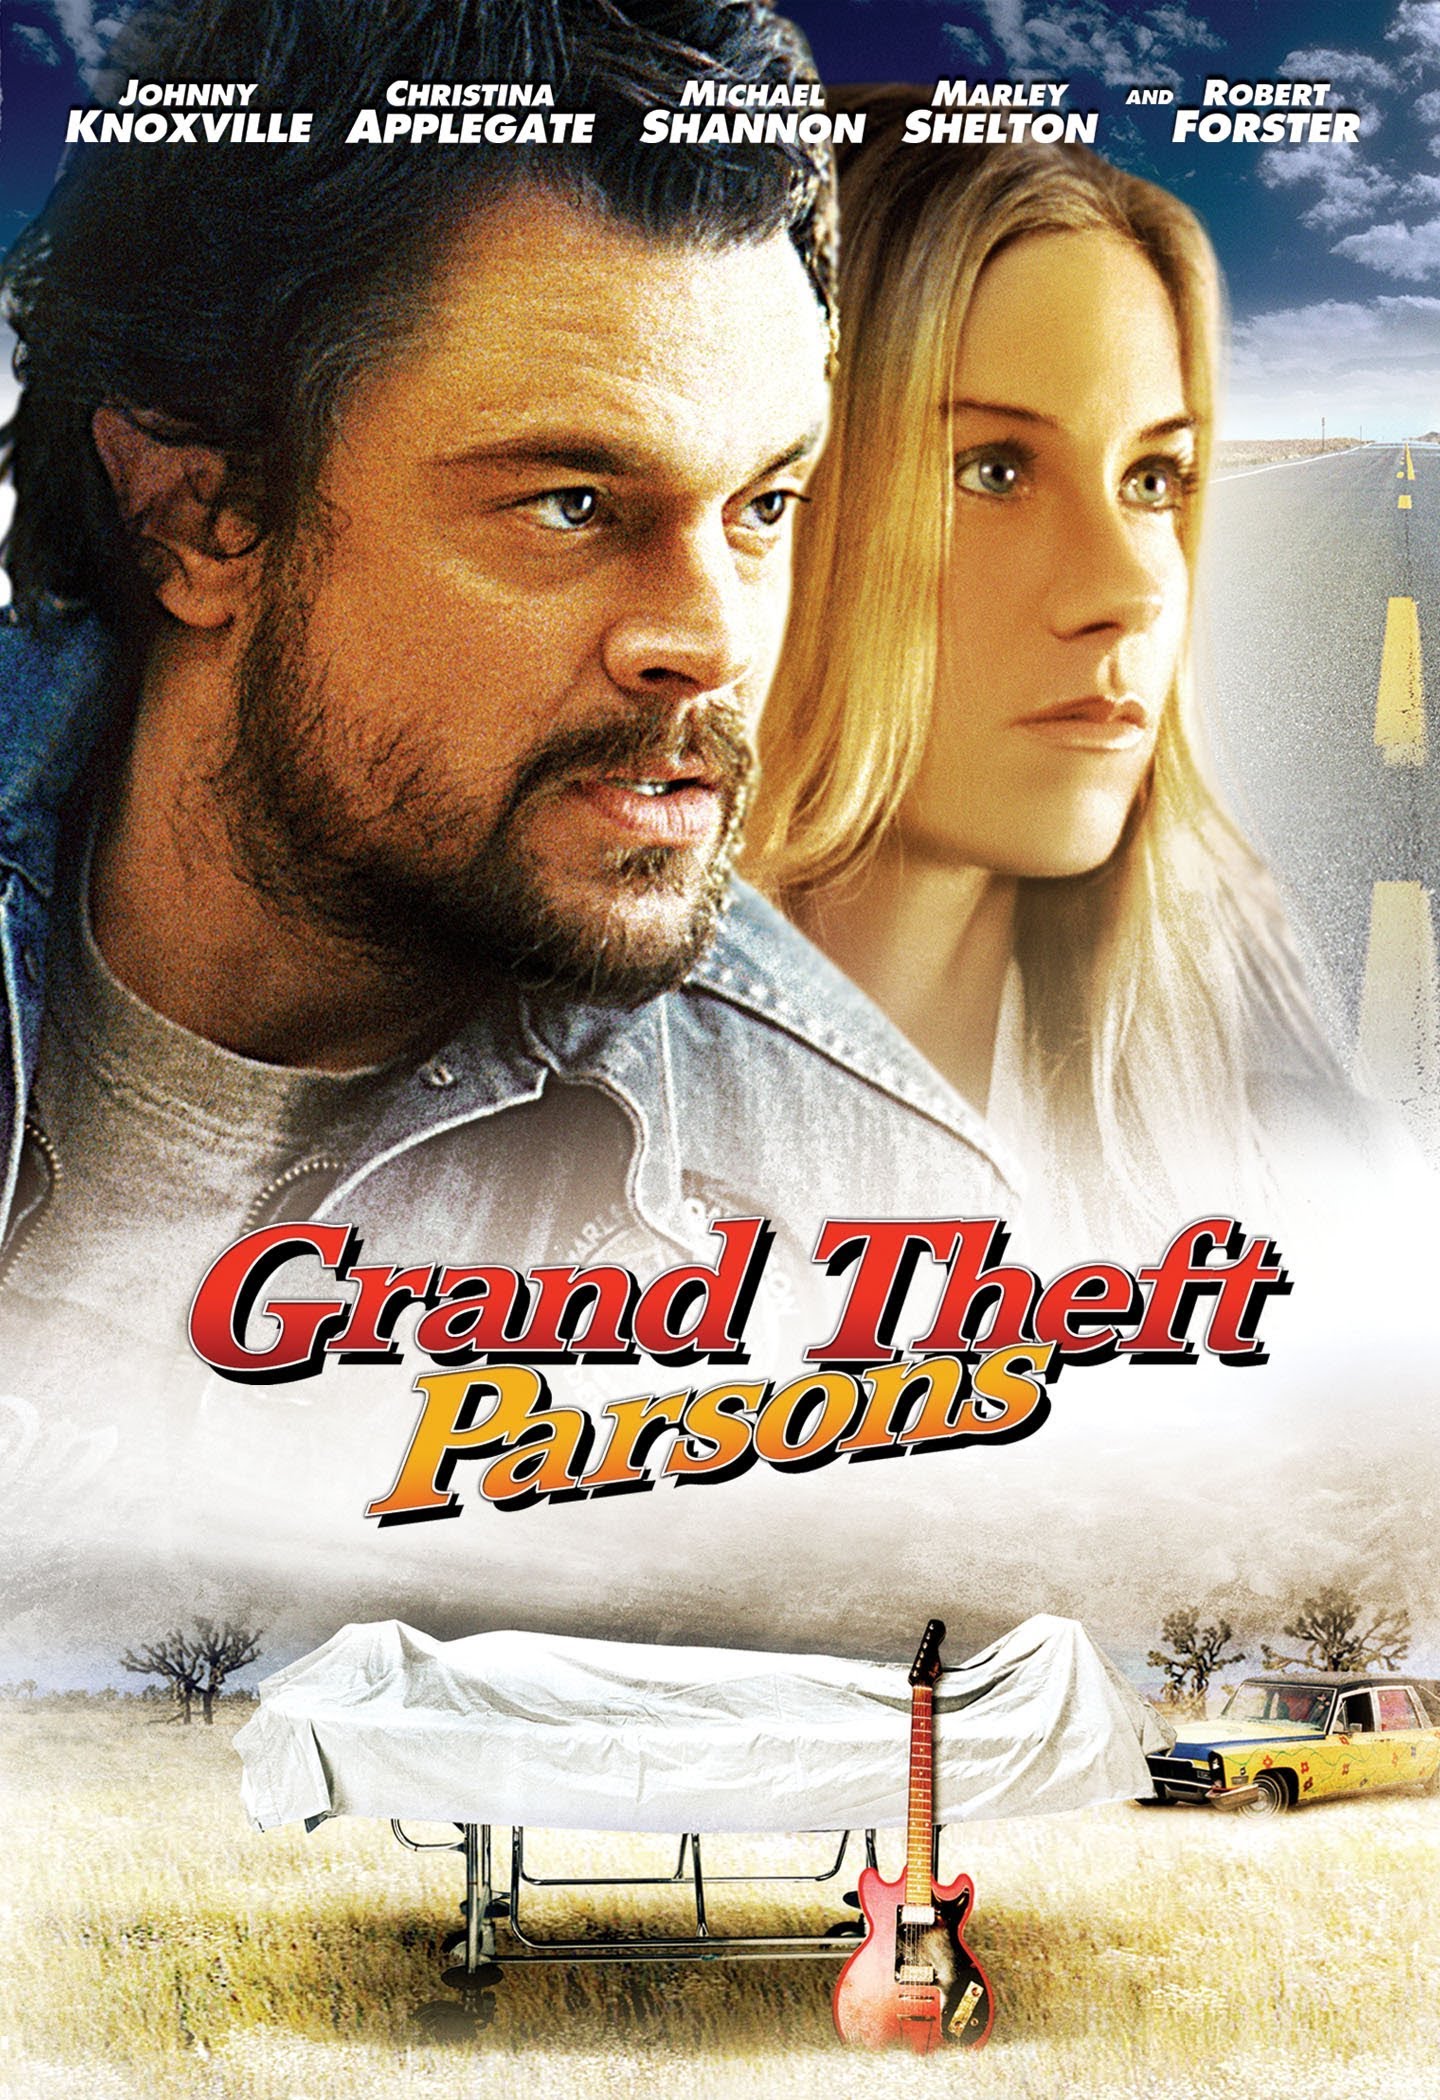 Grand Theft Parsons (2003)